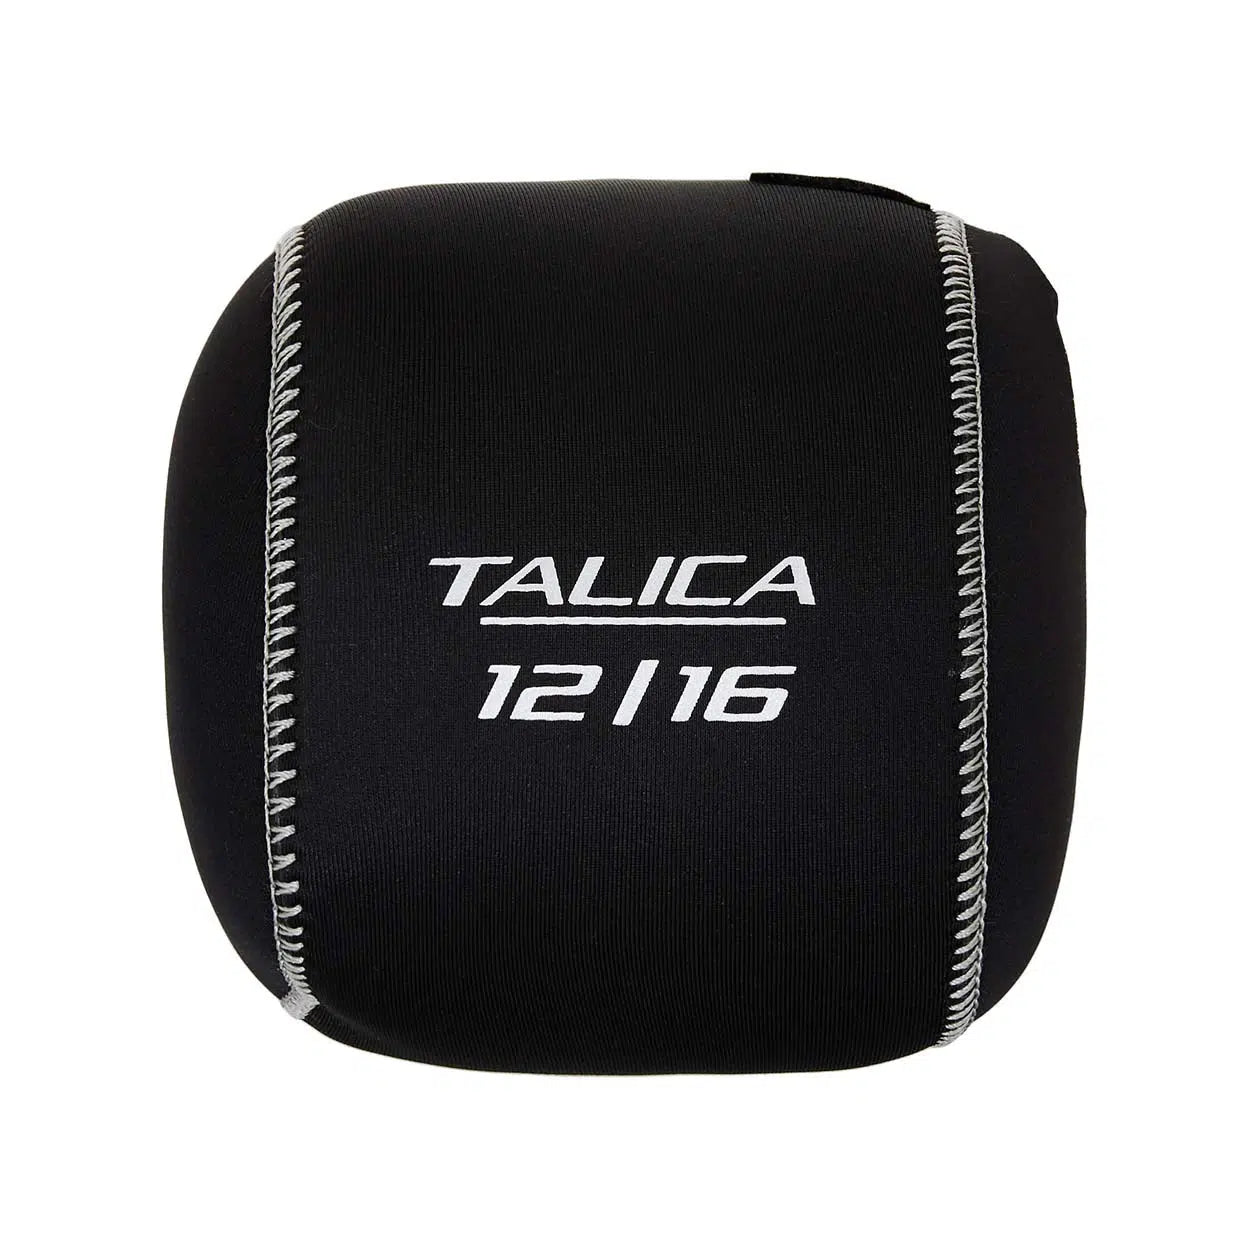 Shimano Talica Reel Cover-Rod & Reel Covers-Shimano-Suits Sizes 12/16-Fishing Station